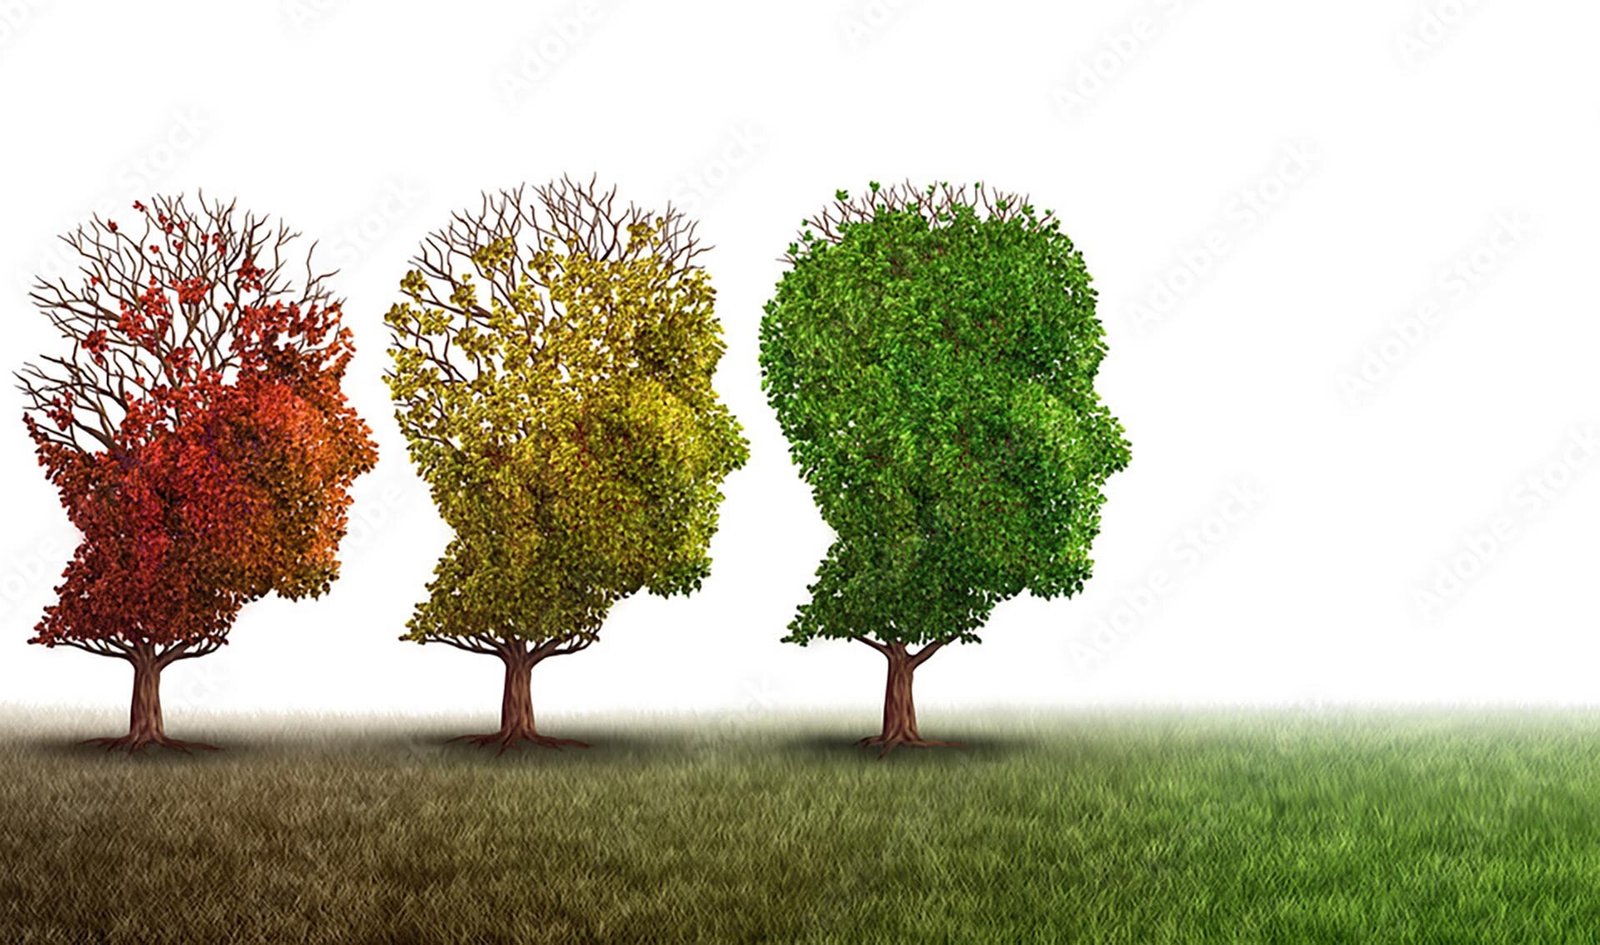 Research team identifies new treatment target for Alzheimers disease